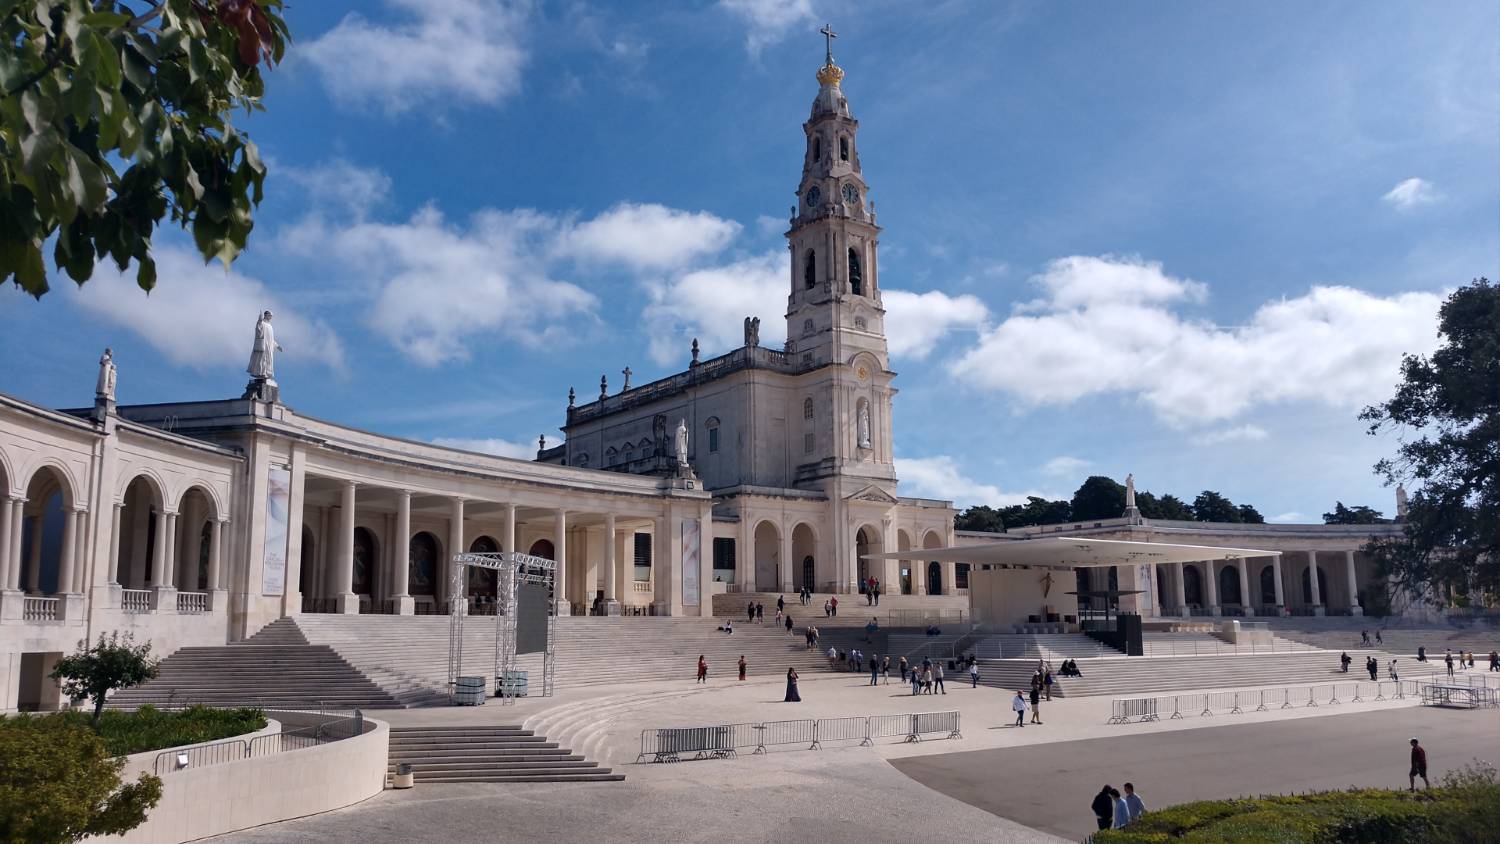 The basilica built at the site of the apparitions of the Virgin Mary is a popular pilgrim site on the 13th day of the month (Renato Alves da Costa/CC)